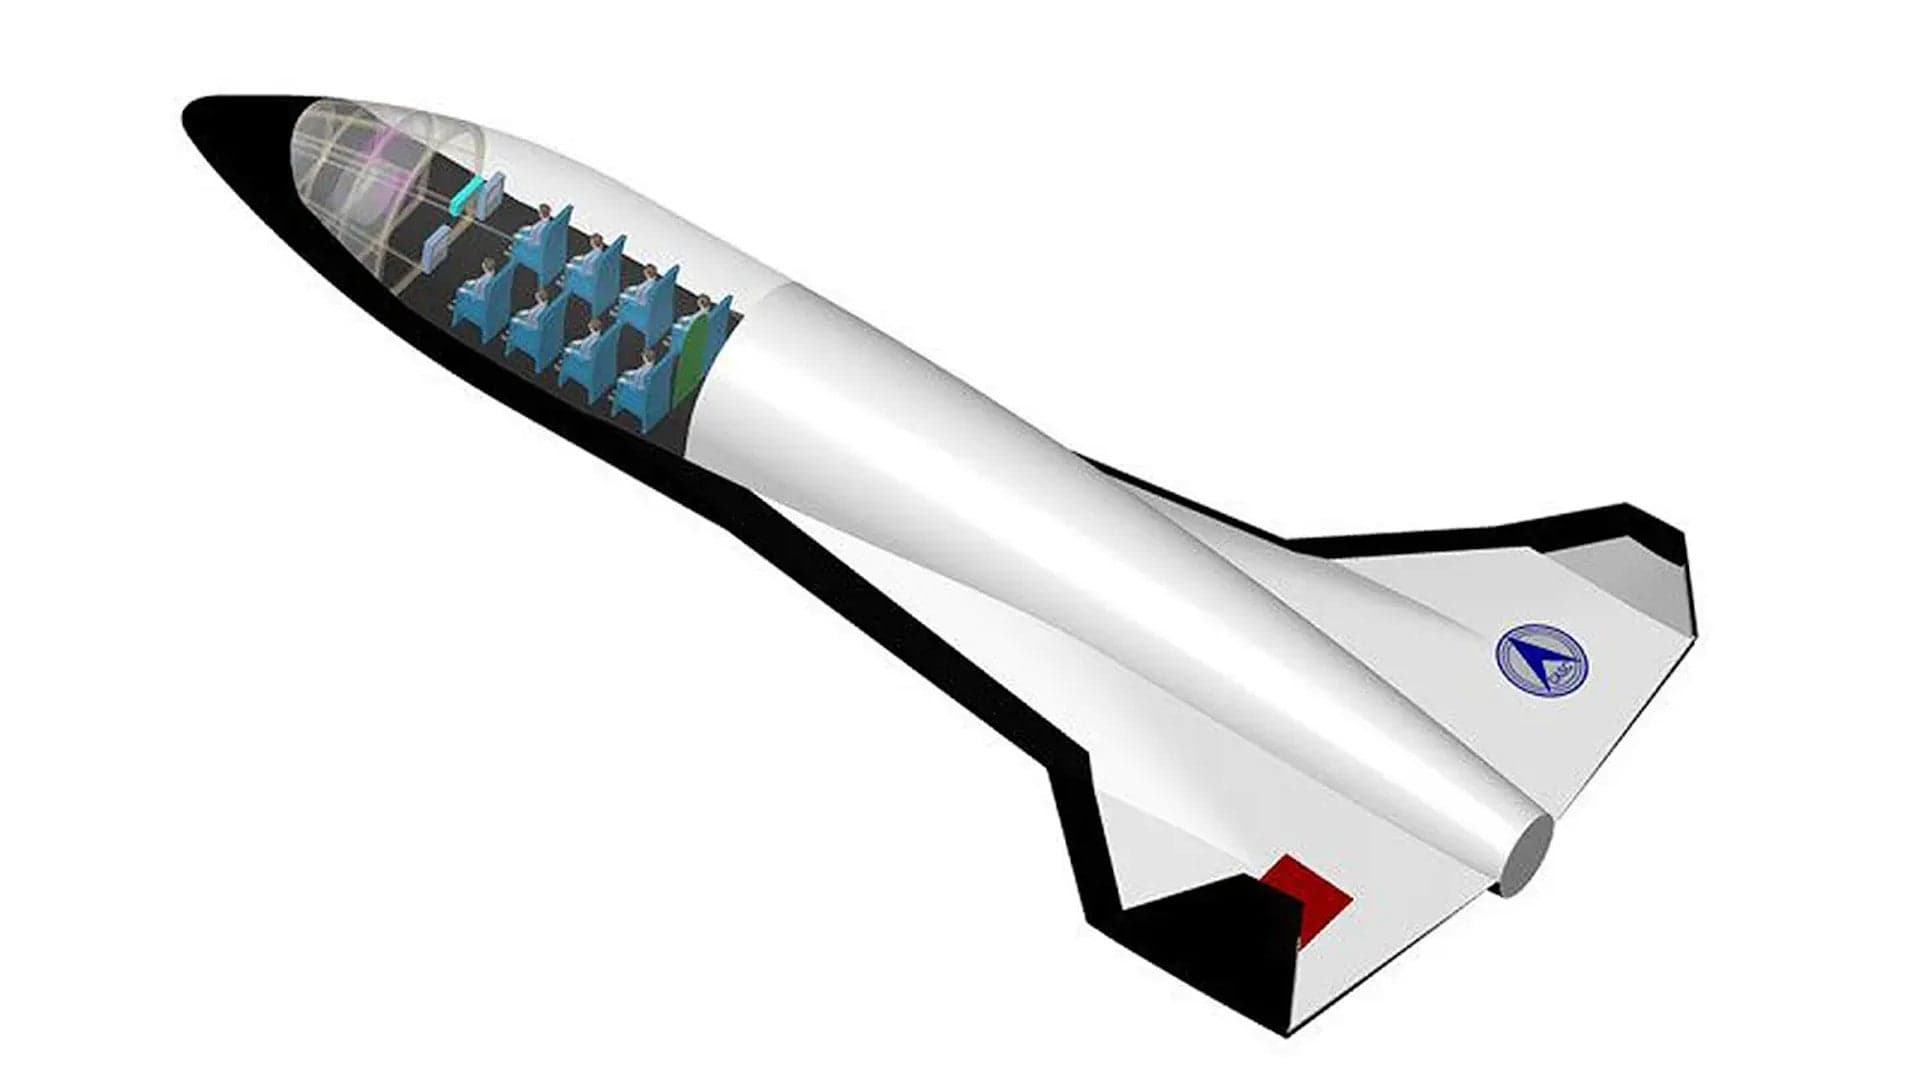 China Says It Conducted A Successful Suborbital Test Of A Reusable Spaceplane